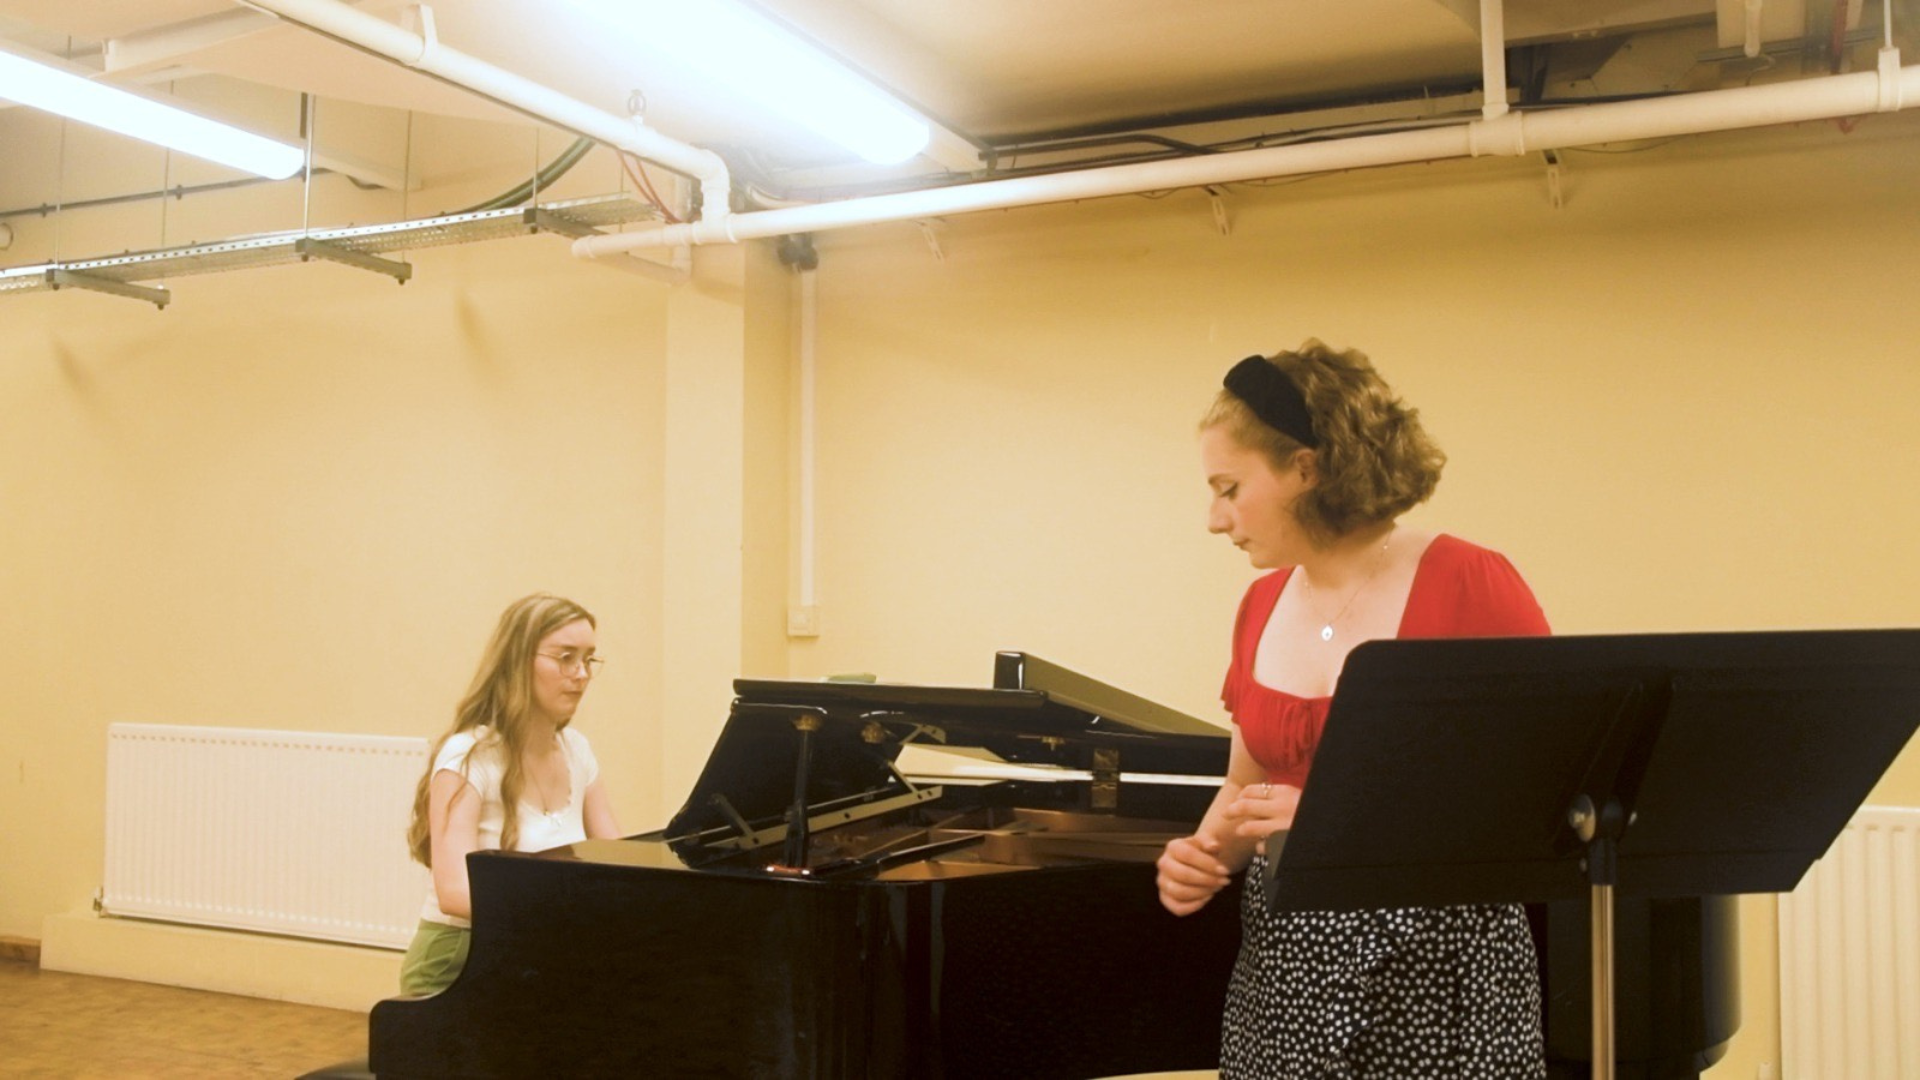 Two women in a room, woman on the left with blond hair and white t-shirt is playing the piano sat down, while the other one is on the right side, leaning on the piano, with short brown hair and a red t-shirt